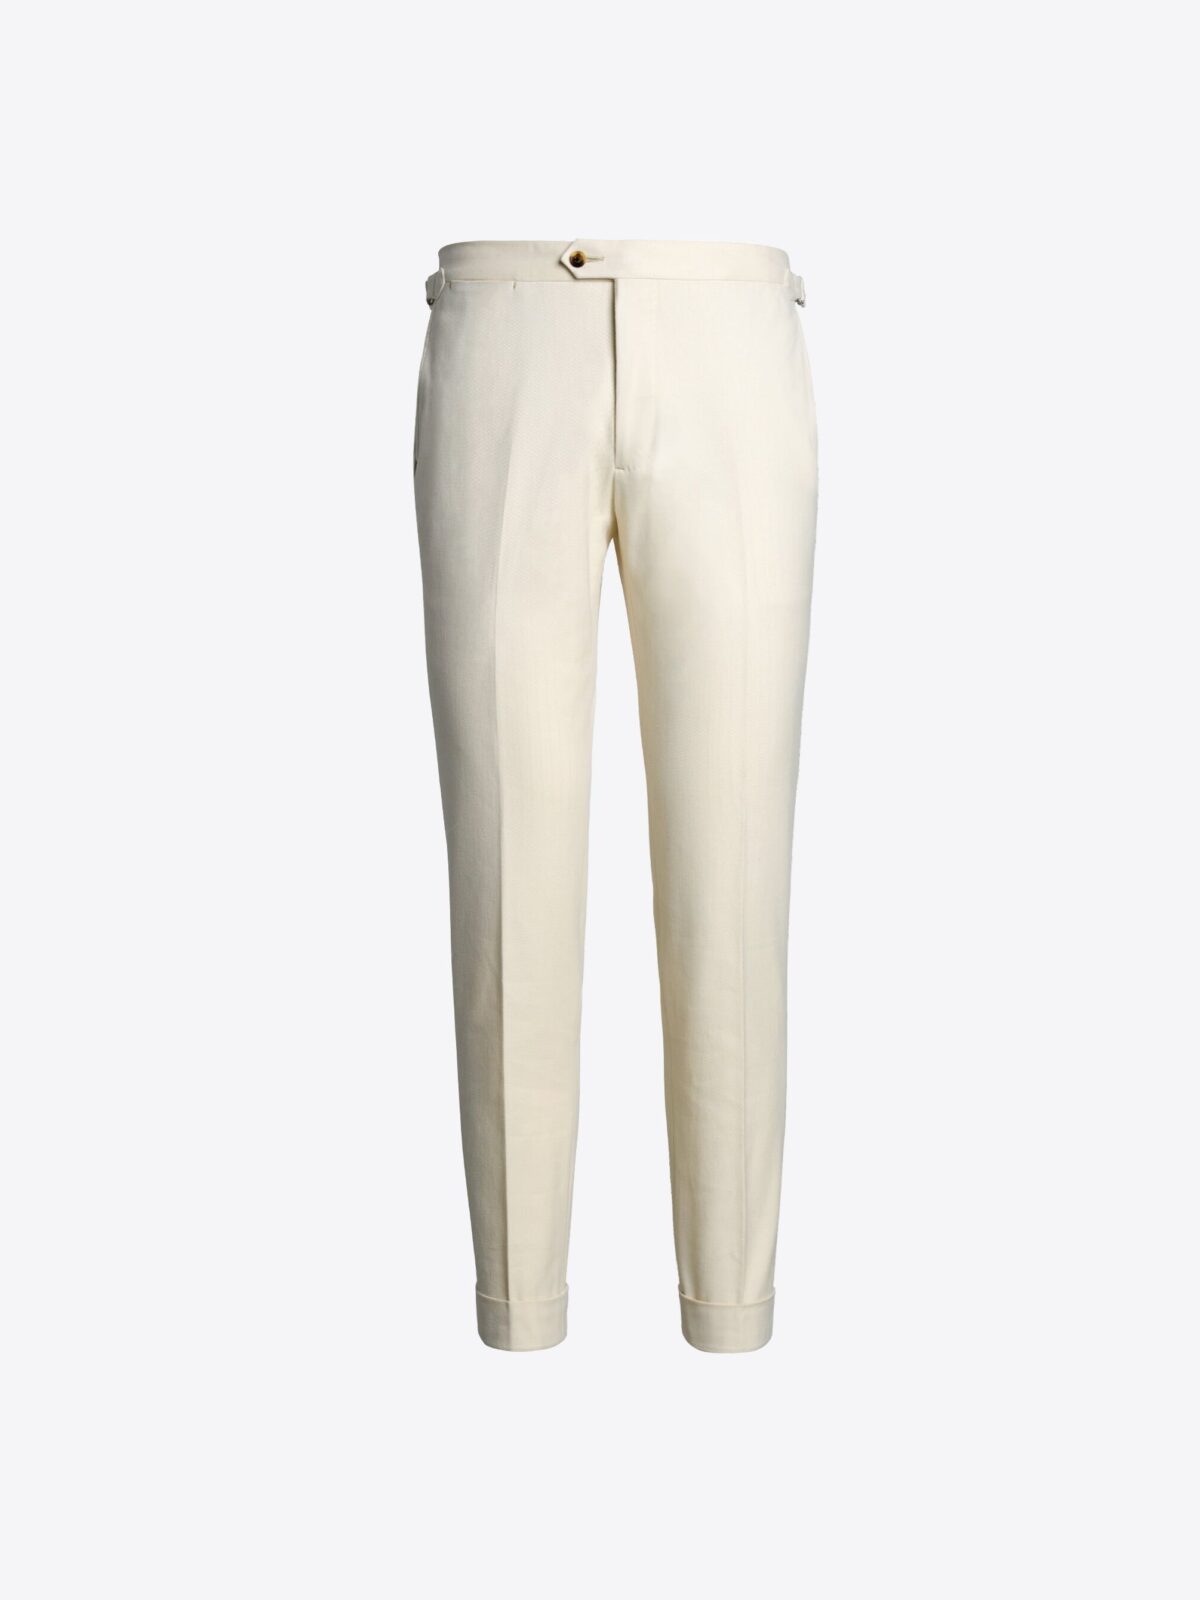 Cream Heavy Brushed Cotton Stretch Side Tab Dress Pant